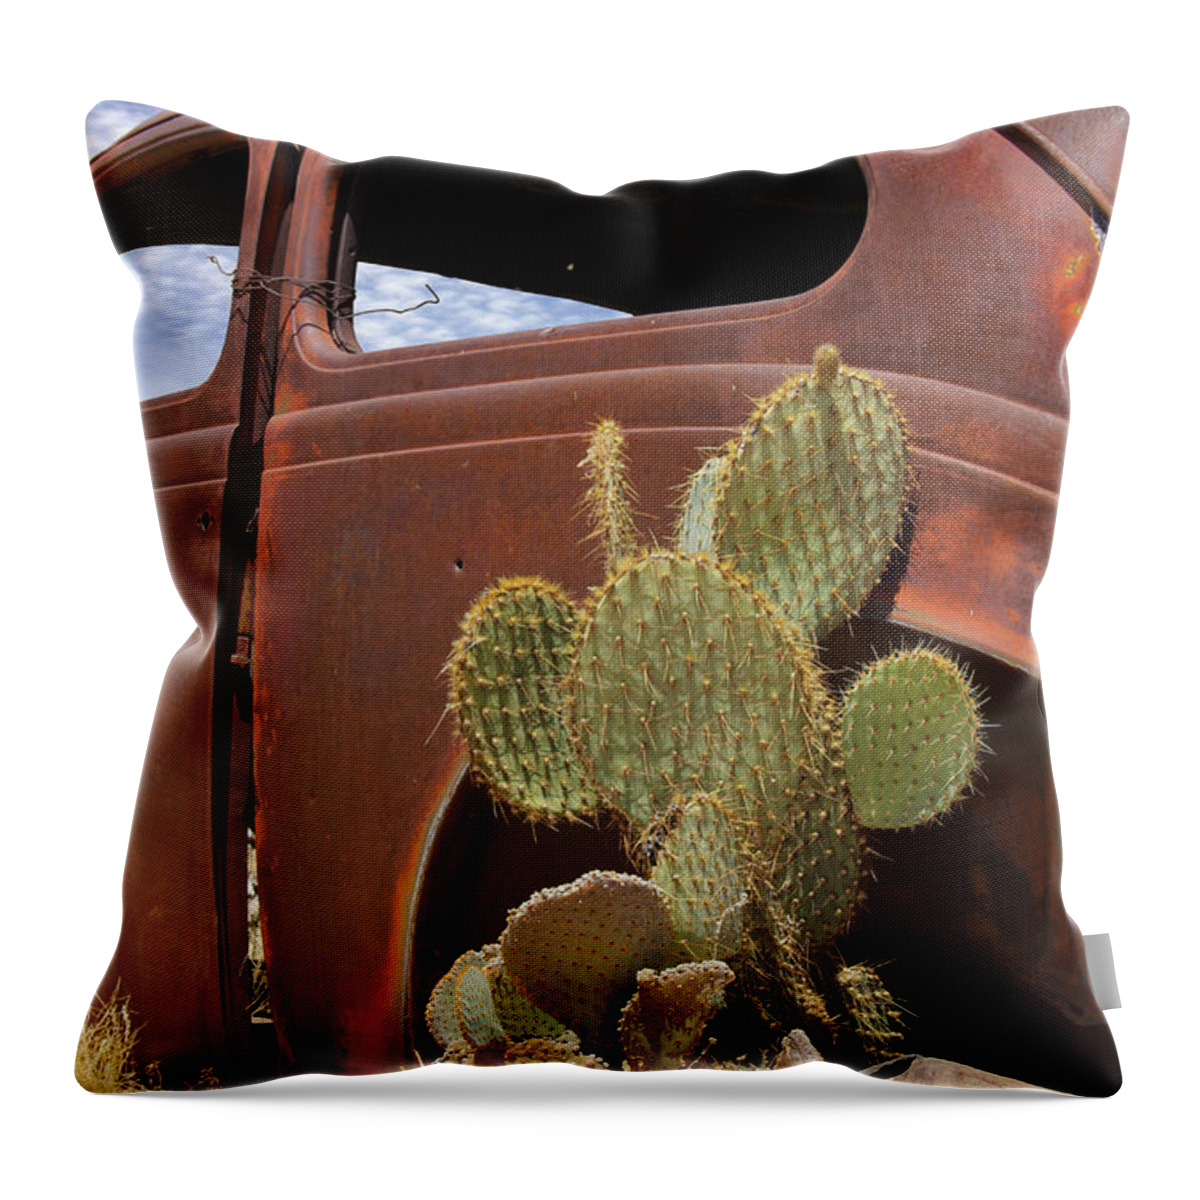 Southwest Throw Pillow featuring the photograph Route 66 Cactus by Mike McGlothlen